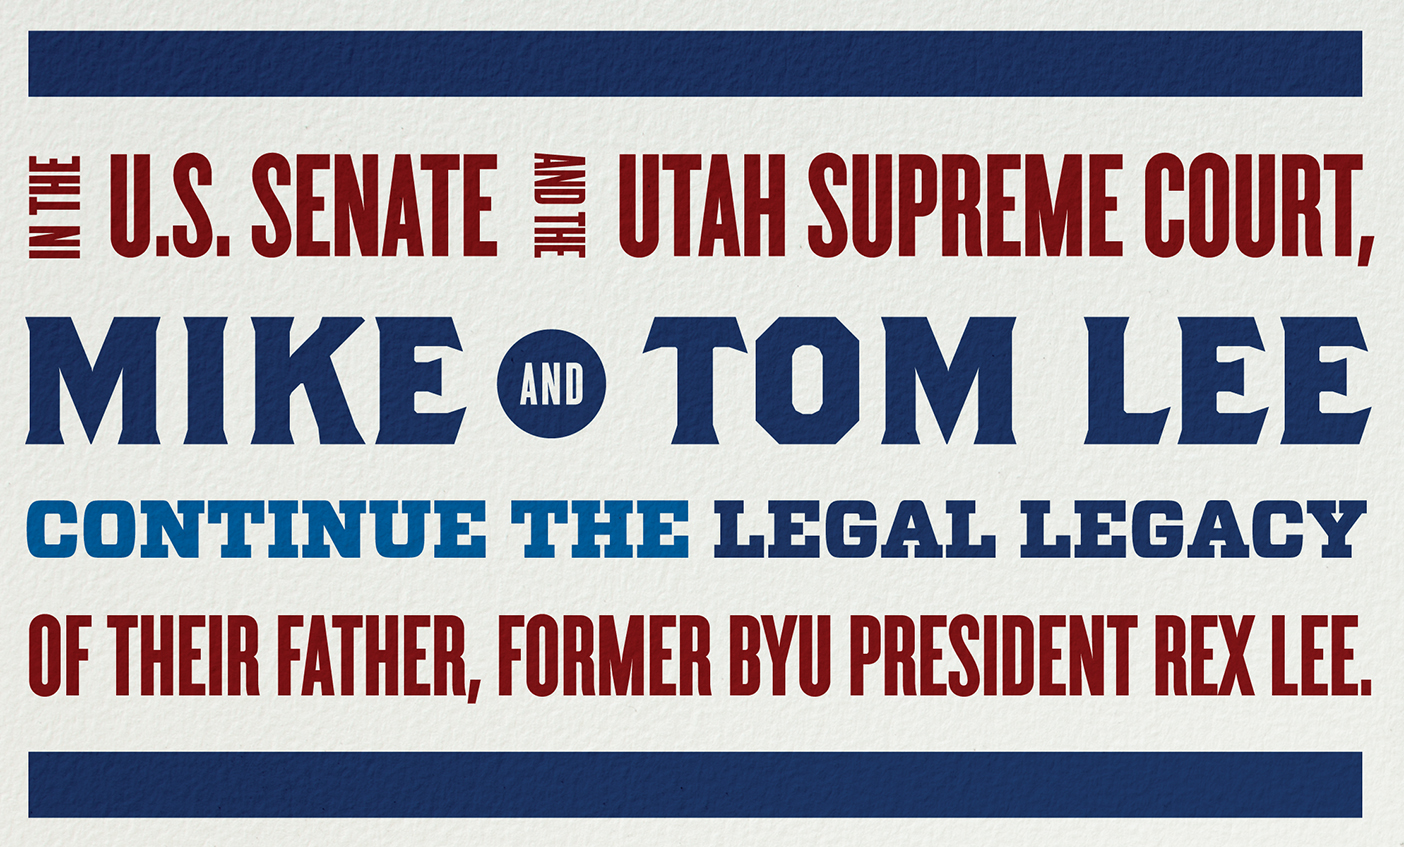 Designed quote that reads " In the U.S. Senate and the Utah Supreme Court, Mike and Tom Lee continue the legal legacy of their father, former BYU president Rex Lee."